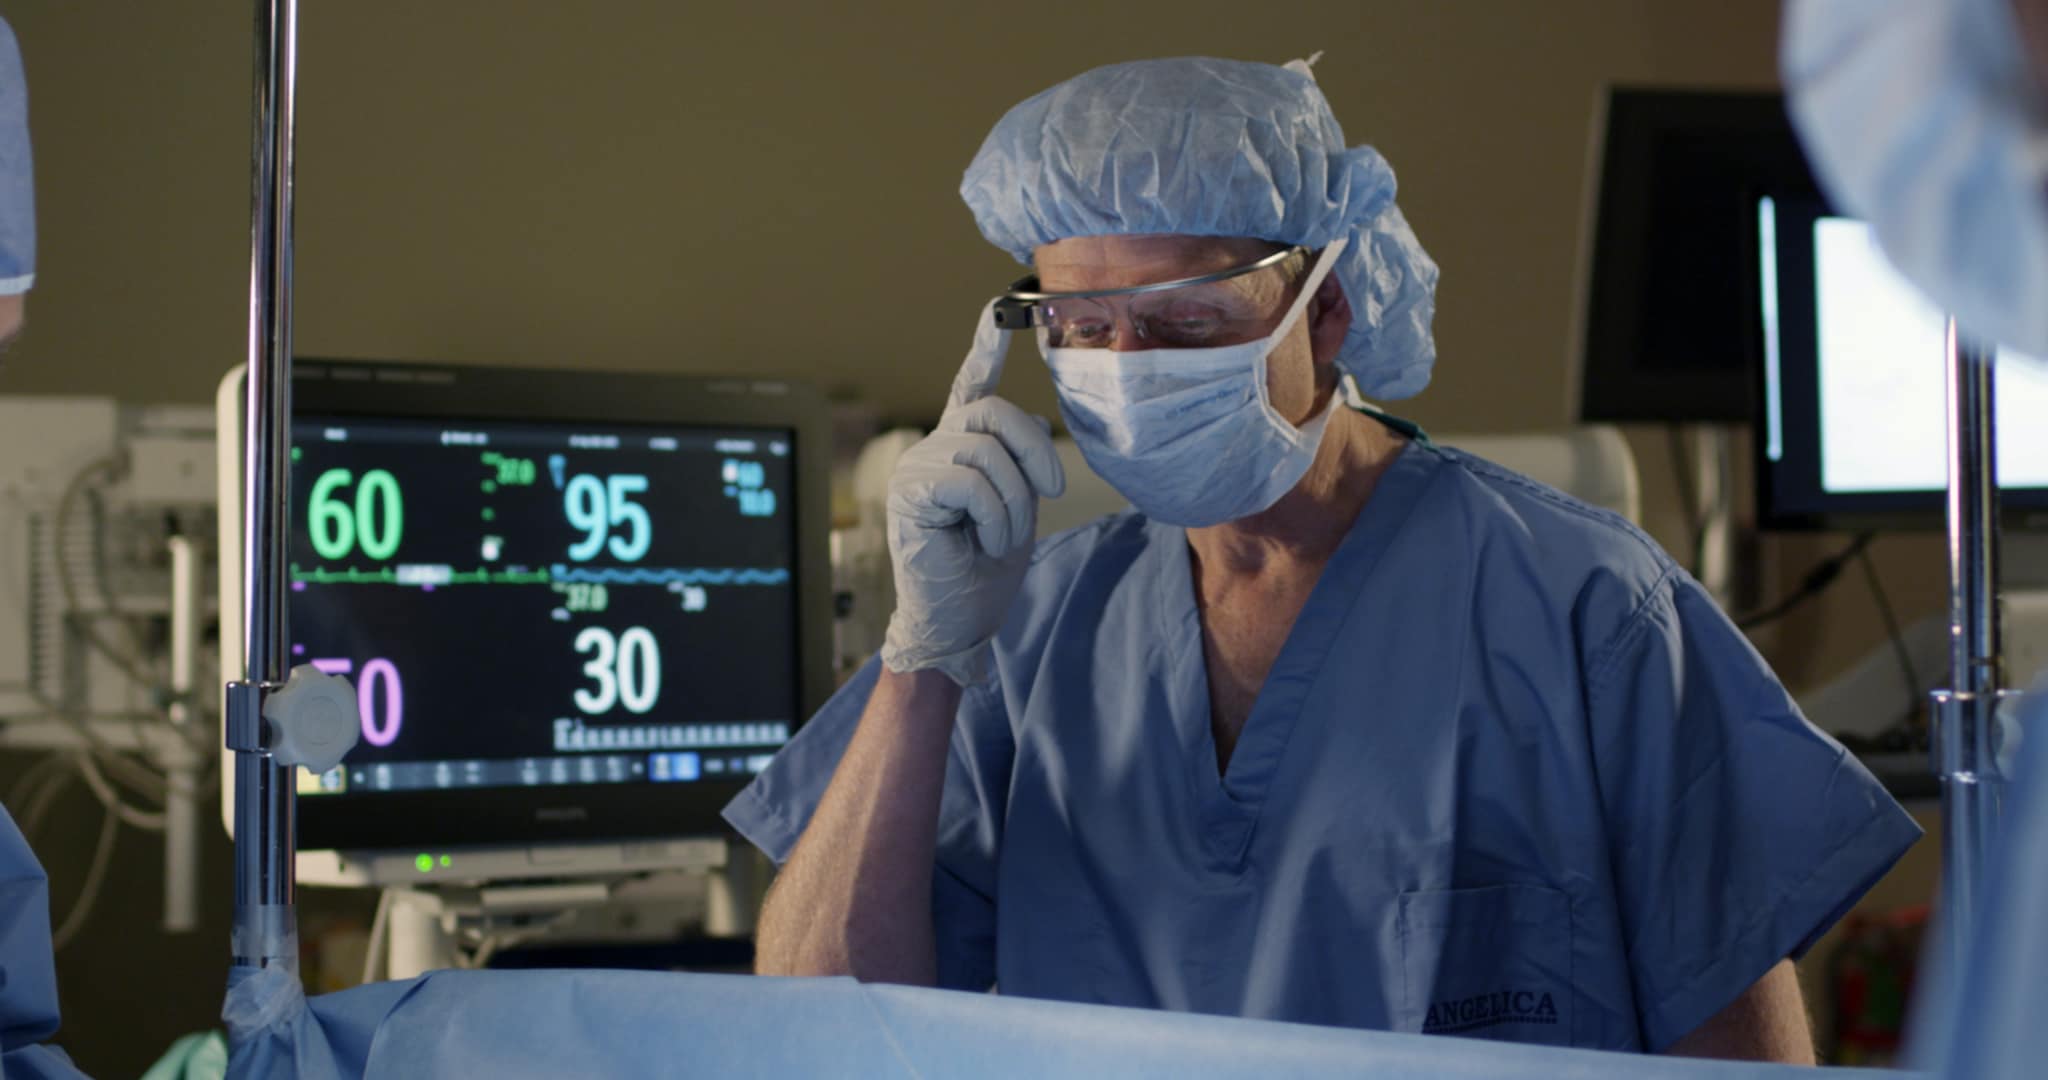 Anesthesiologist viewing vital signs during surgery